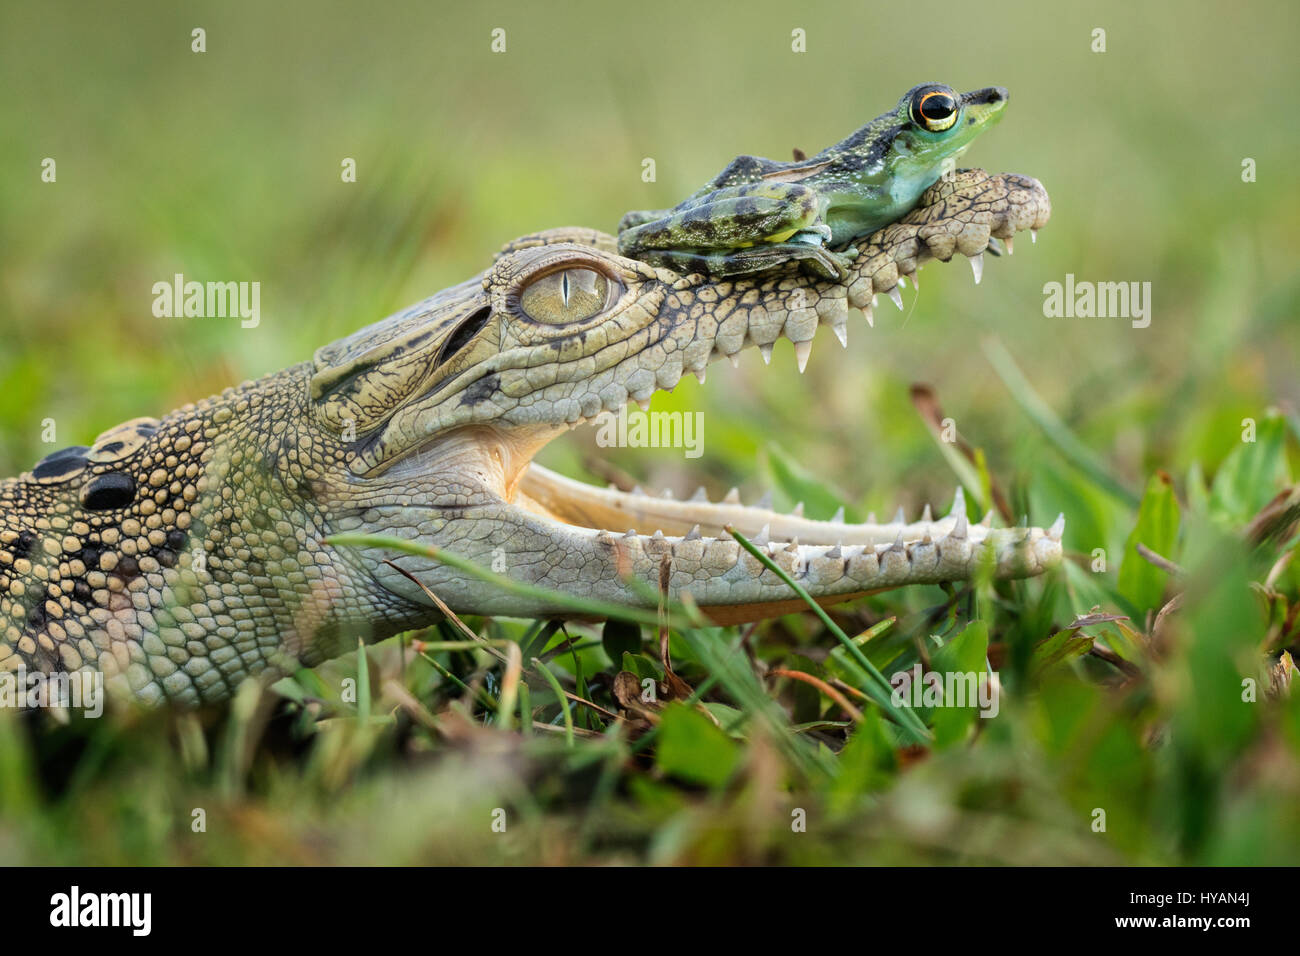 WEST KALIMANTAN, INDONESIA:  A JAWSOME friendship has been struck up between a frog and a crocodile. The unlikely pair have been SNAPPED looking very relaxed in each other’s company, enjoying a lazy sunny afternoon. The pair look completely at ease with each other creating quite a surprising scenario which lasted over five-minutes.  Crocodiles can quite happily munch on a frog for a quick snack, but on this occasion the reptile seemed happy to enjoy the amphibian’s company.  The intrepid frog can be seen making his way up the back of the crocodile and eventually resting up on the tip of the cr Stock Photo